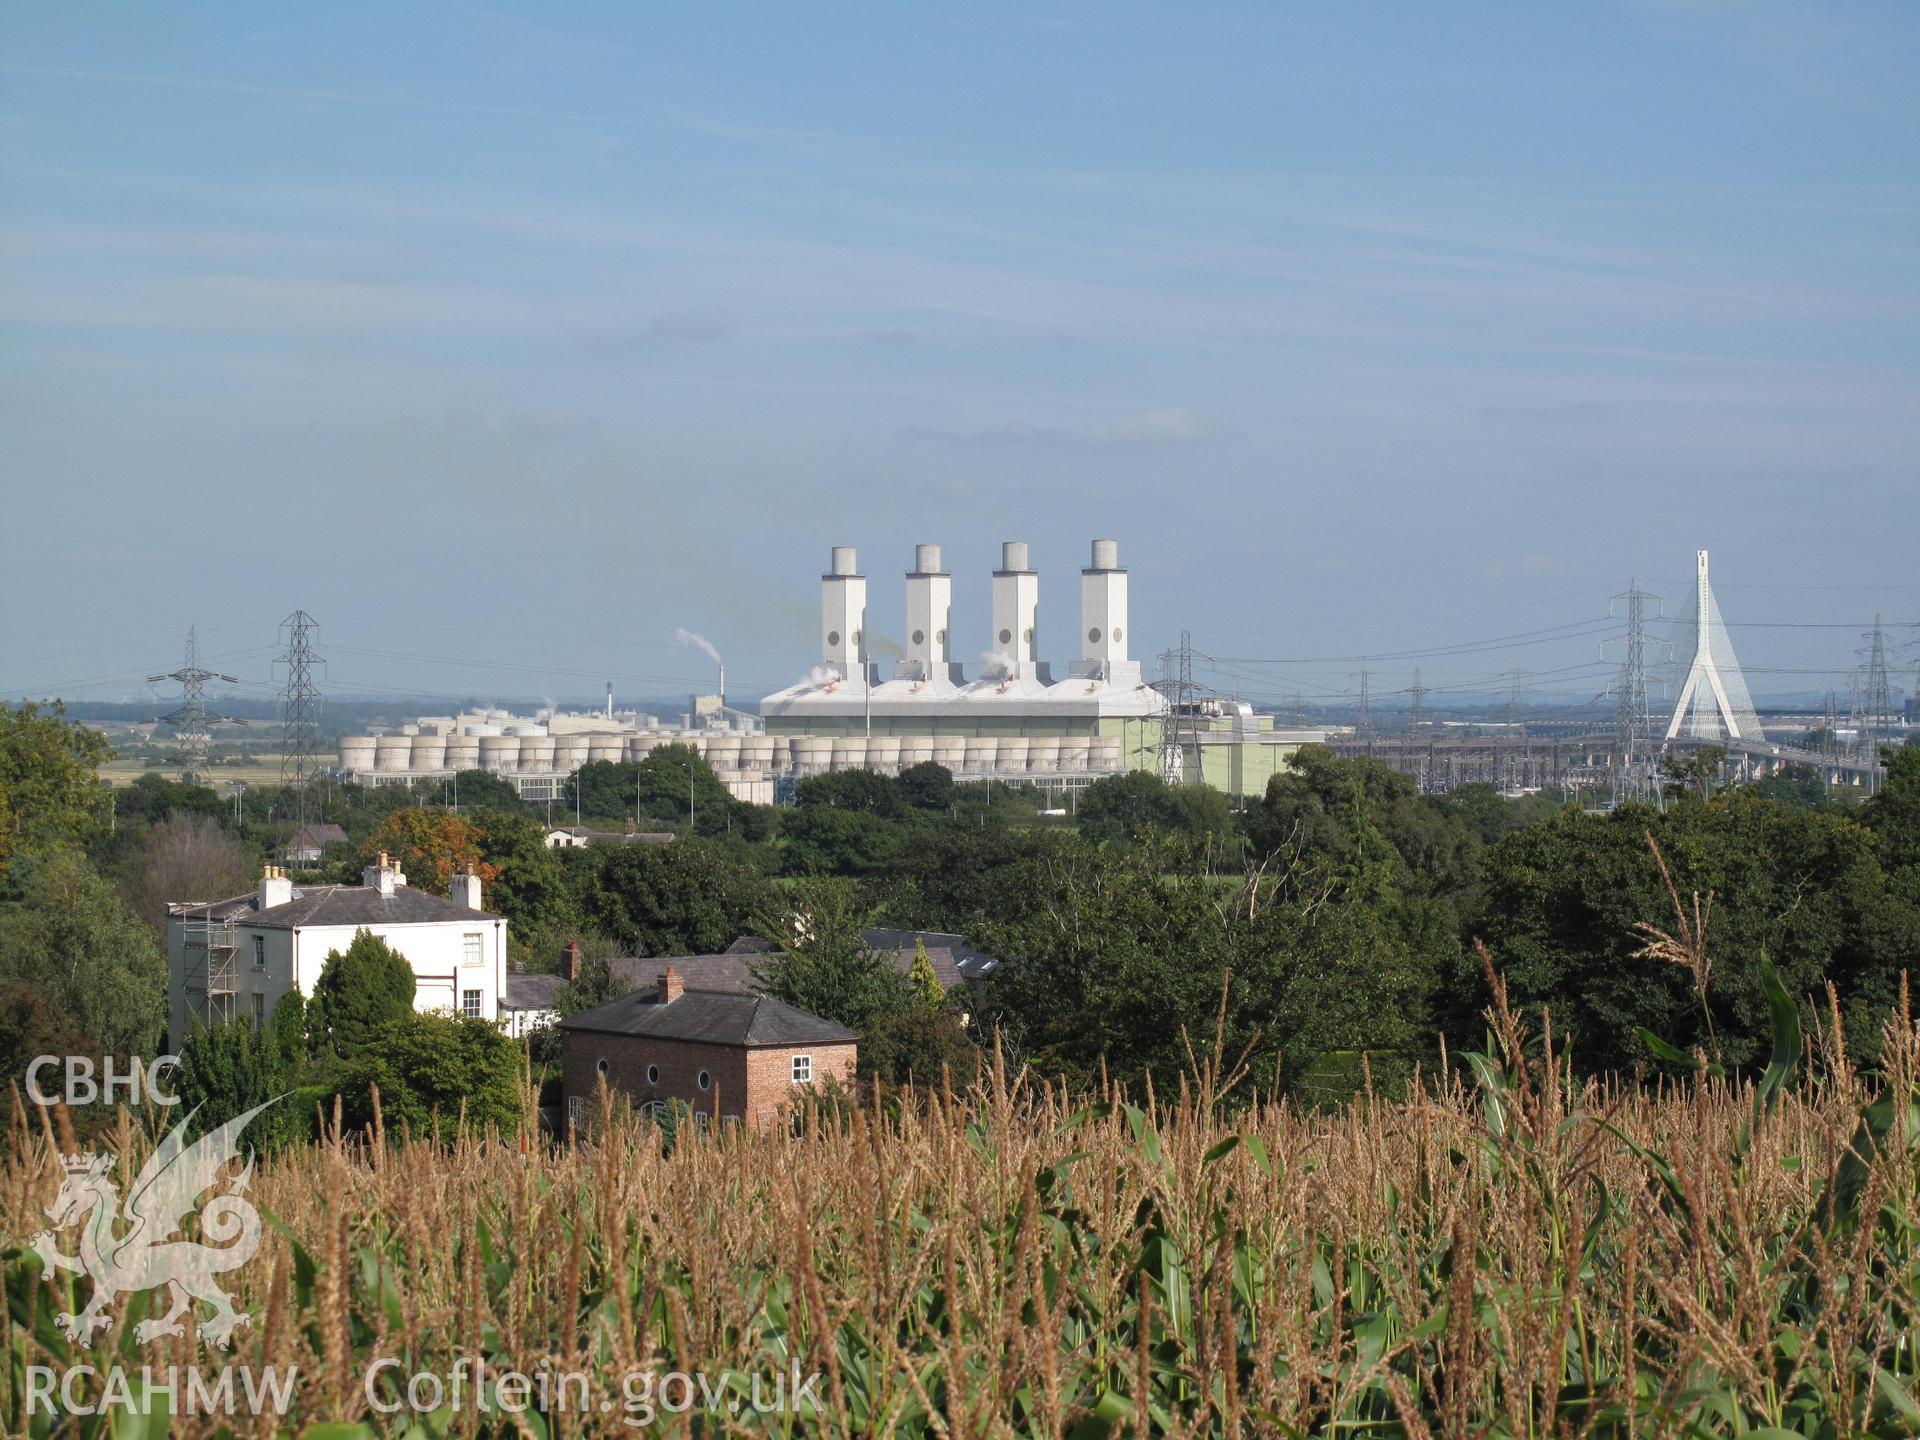 Connah's Quay Power Station from the west, taken by Brian Malaws on 03 September 2010.